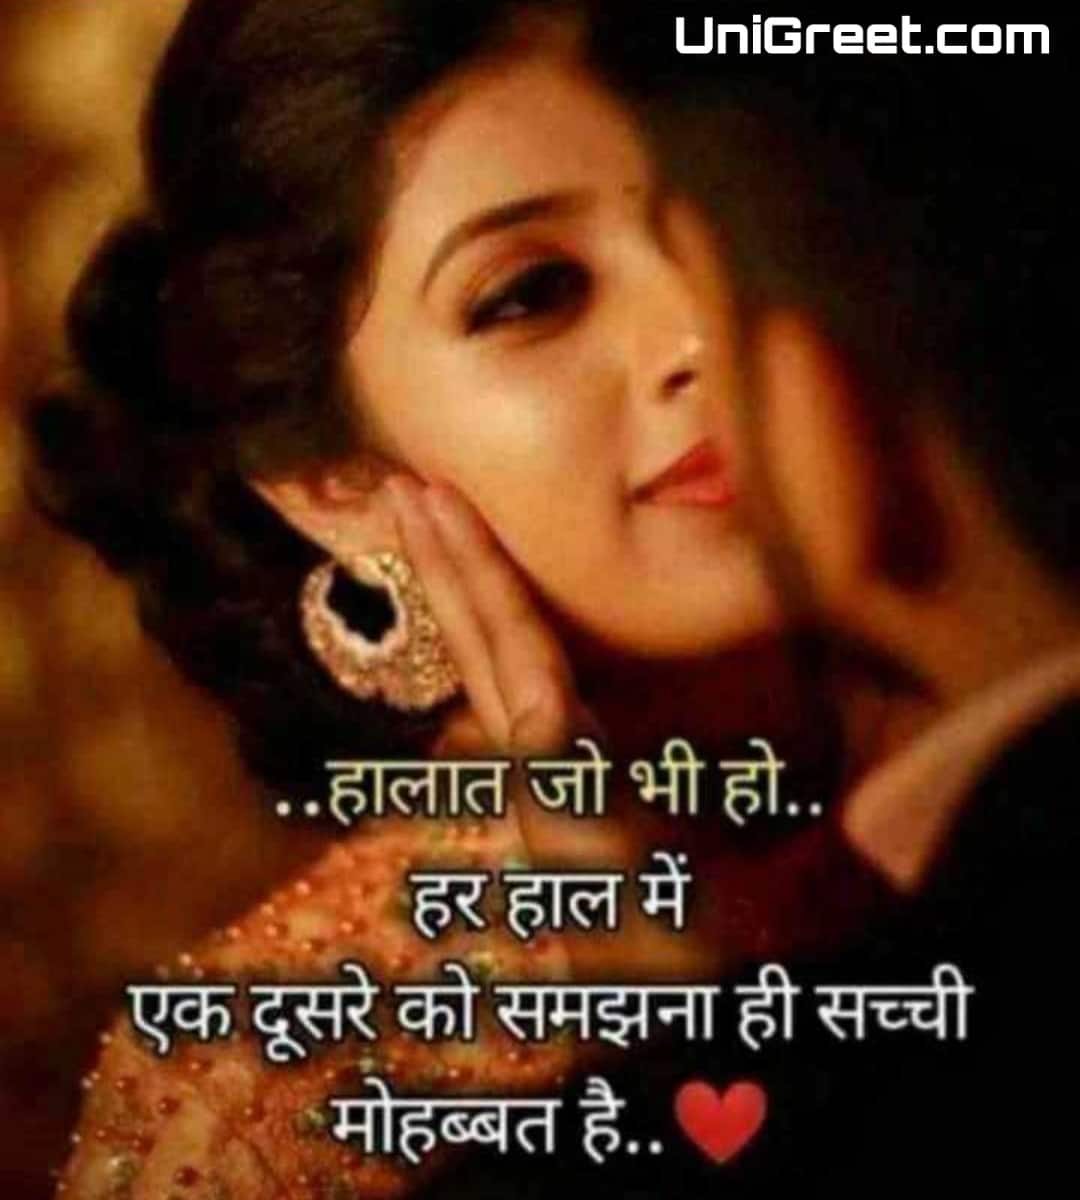 BEST Pyar Dp Pic Shayari Status Images Photos For WhatsApp About ...